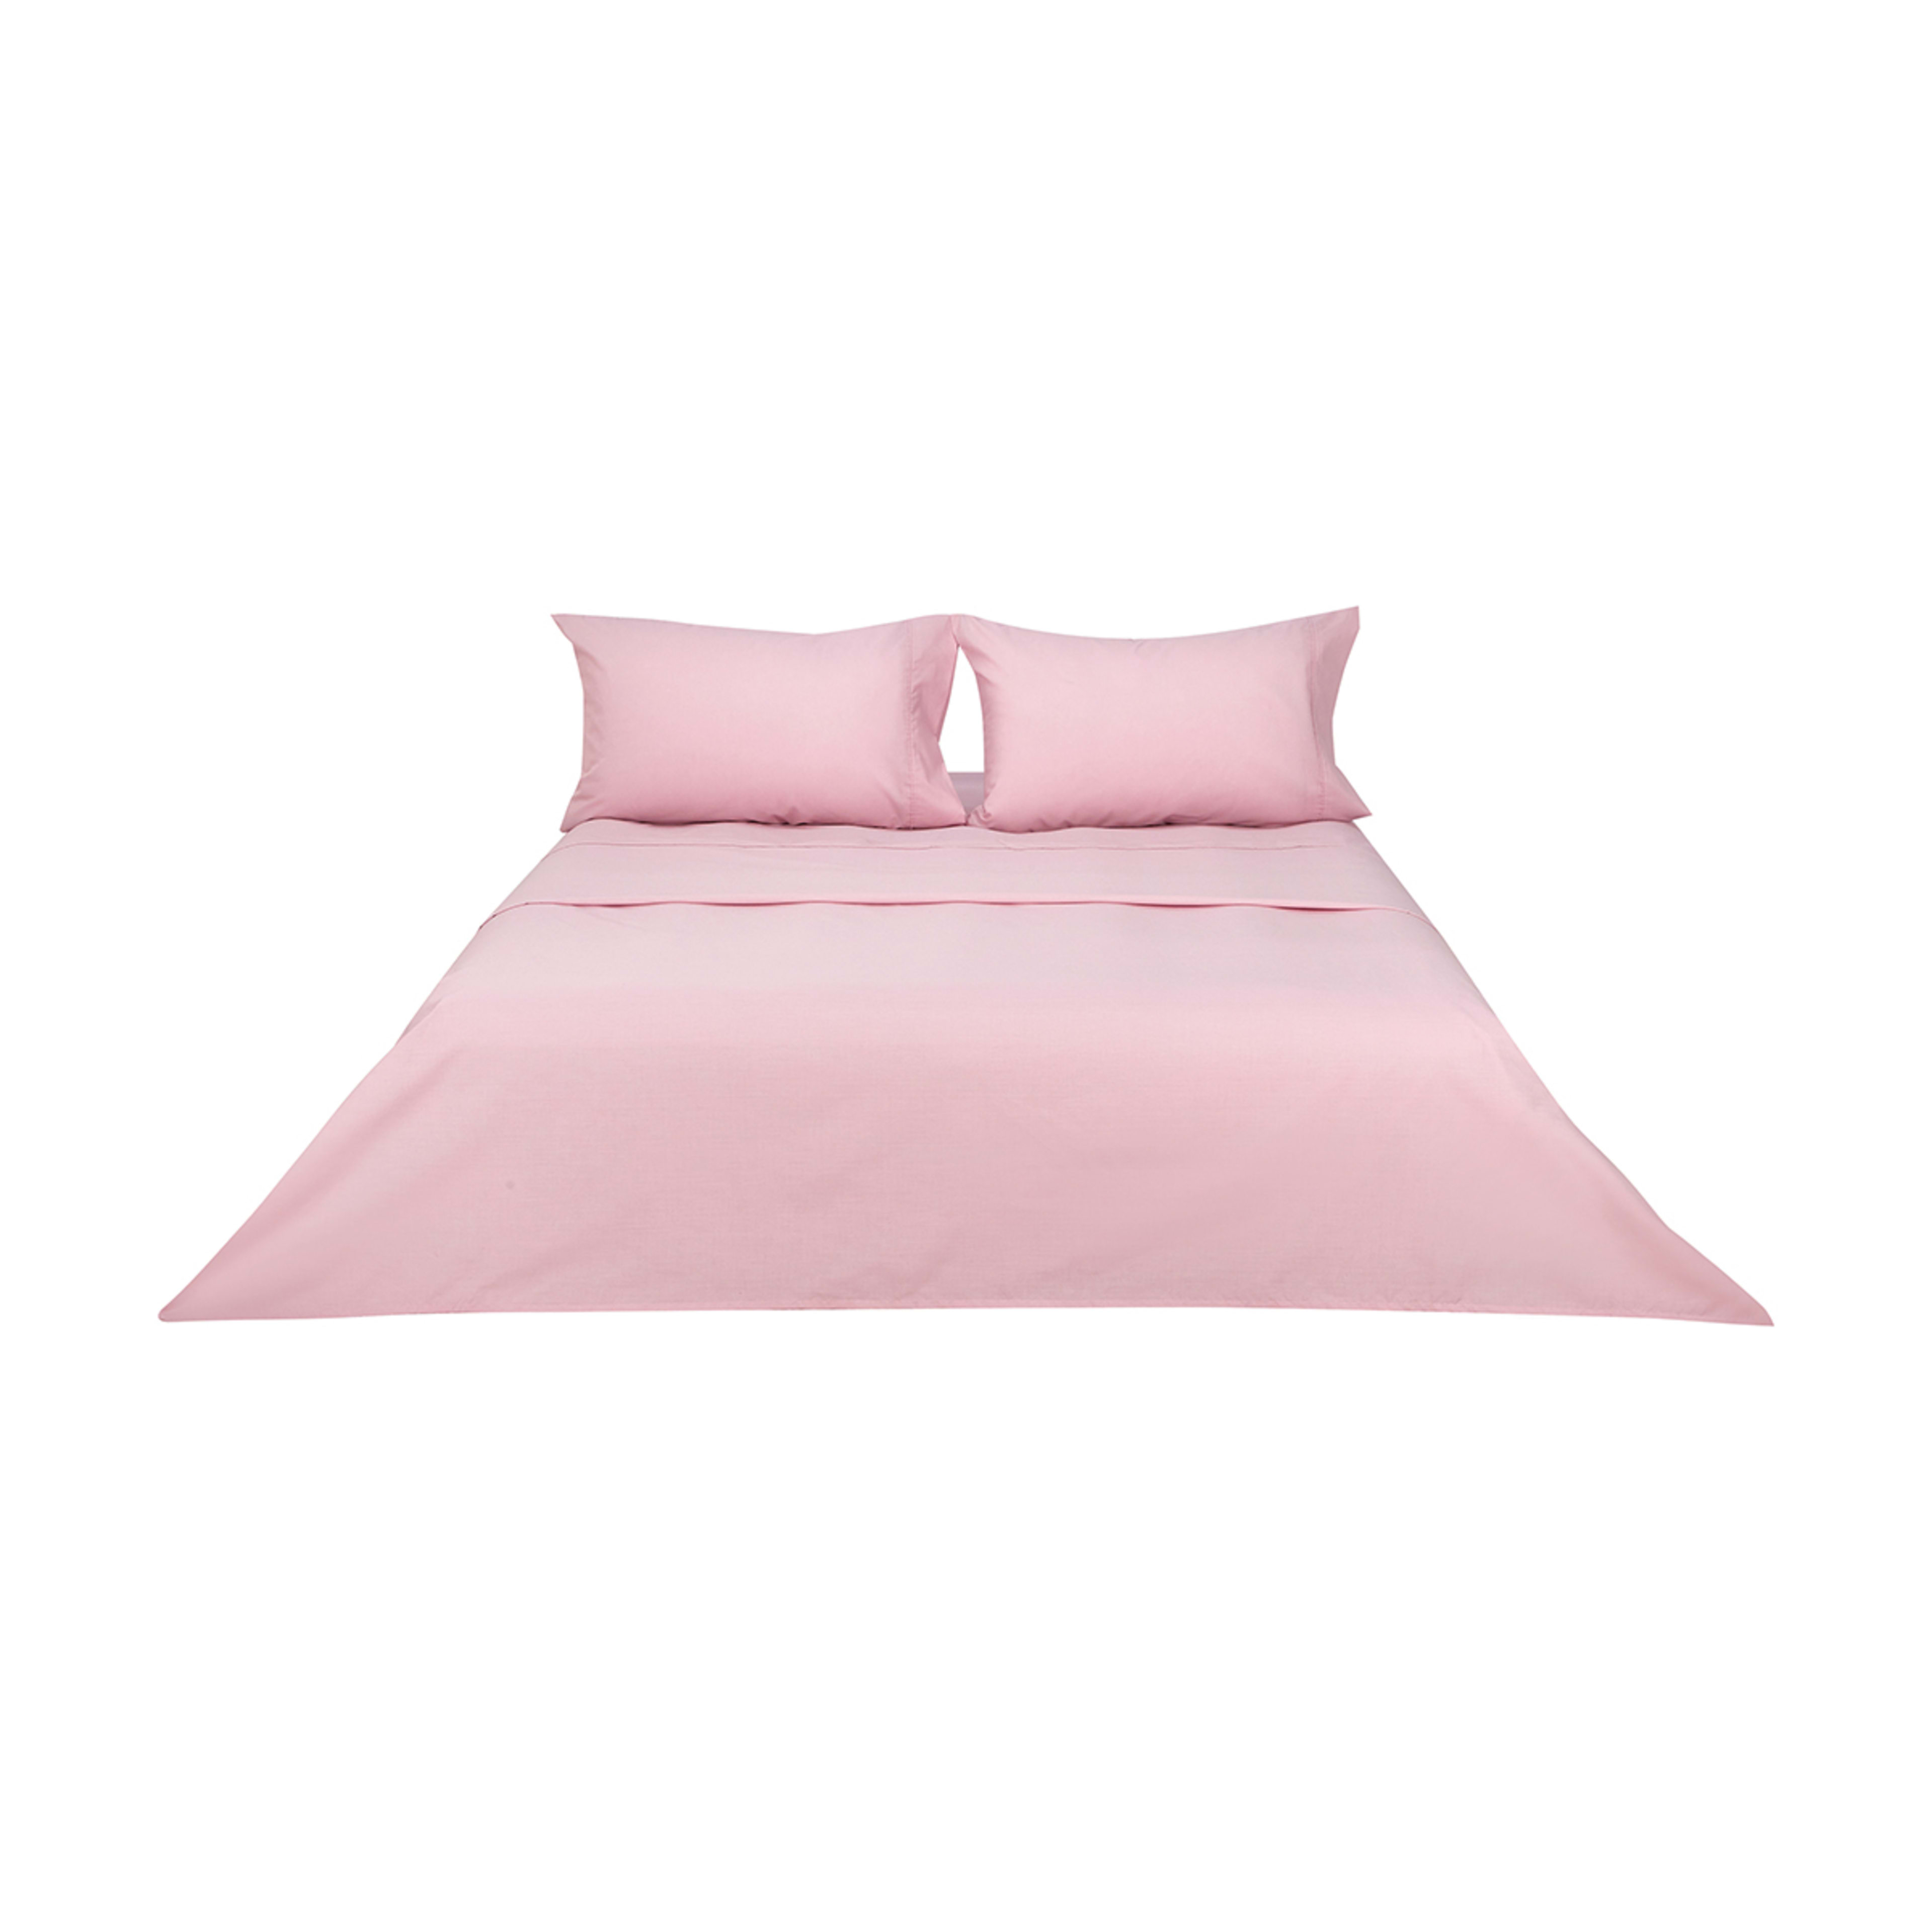 180 Thread Count Sheet Set - Double Bed, Pink - Kmart